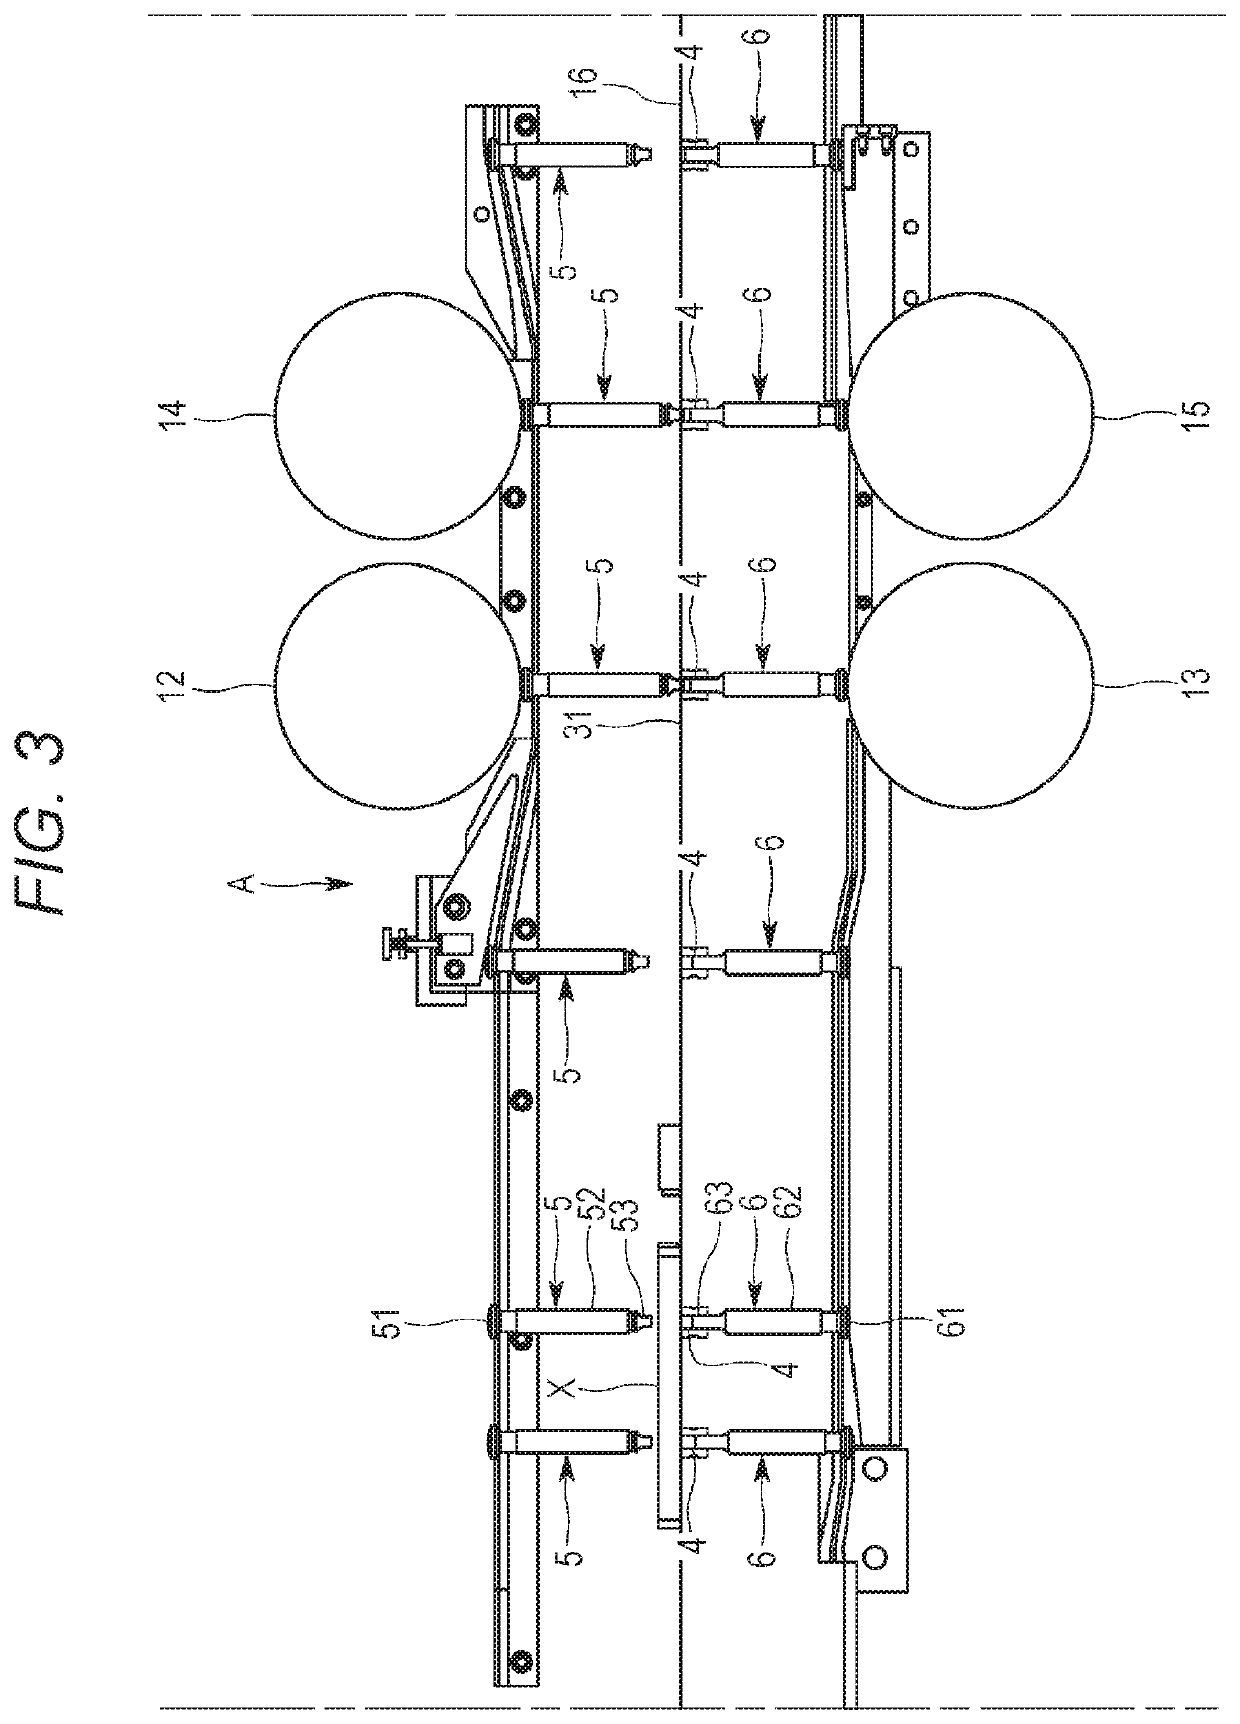 Molded product processing system